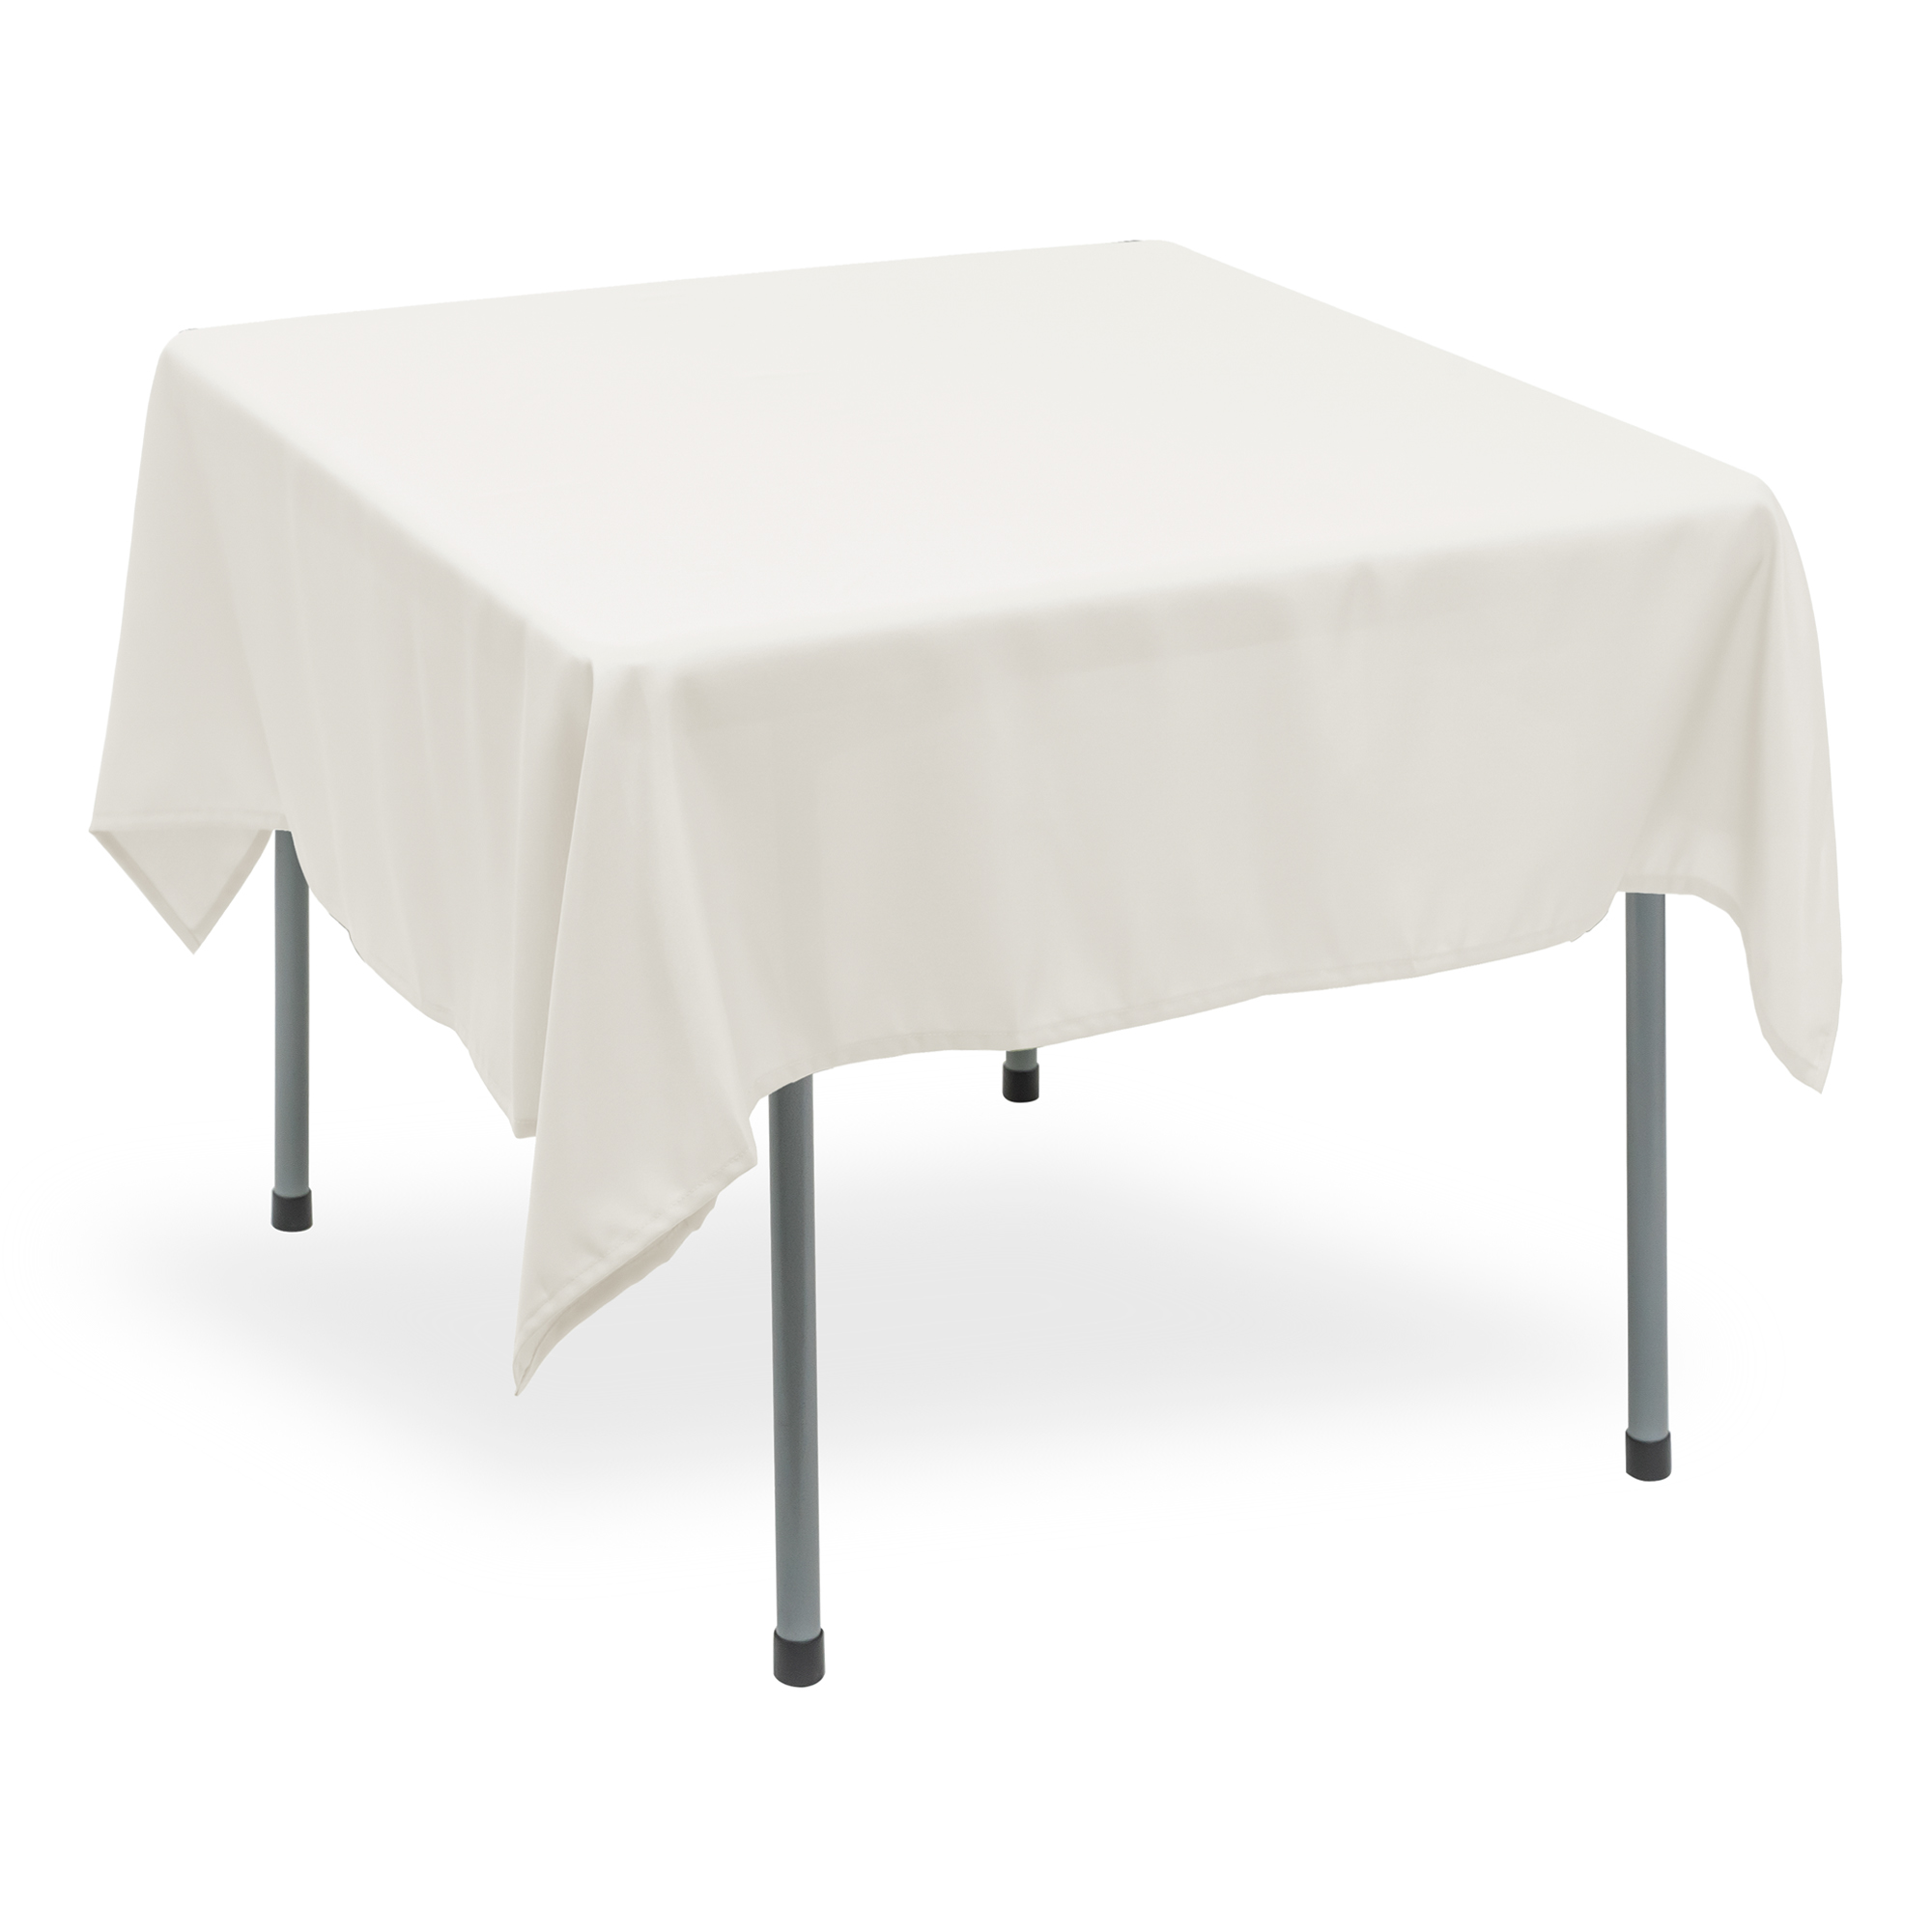 Polyester Square Table Cover 70" - White